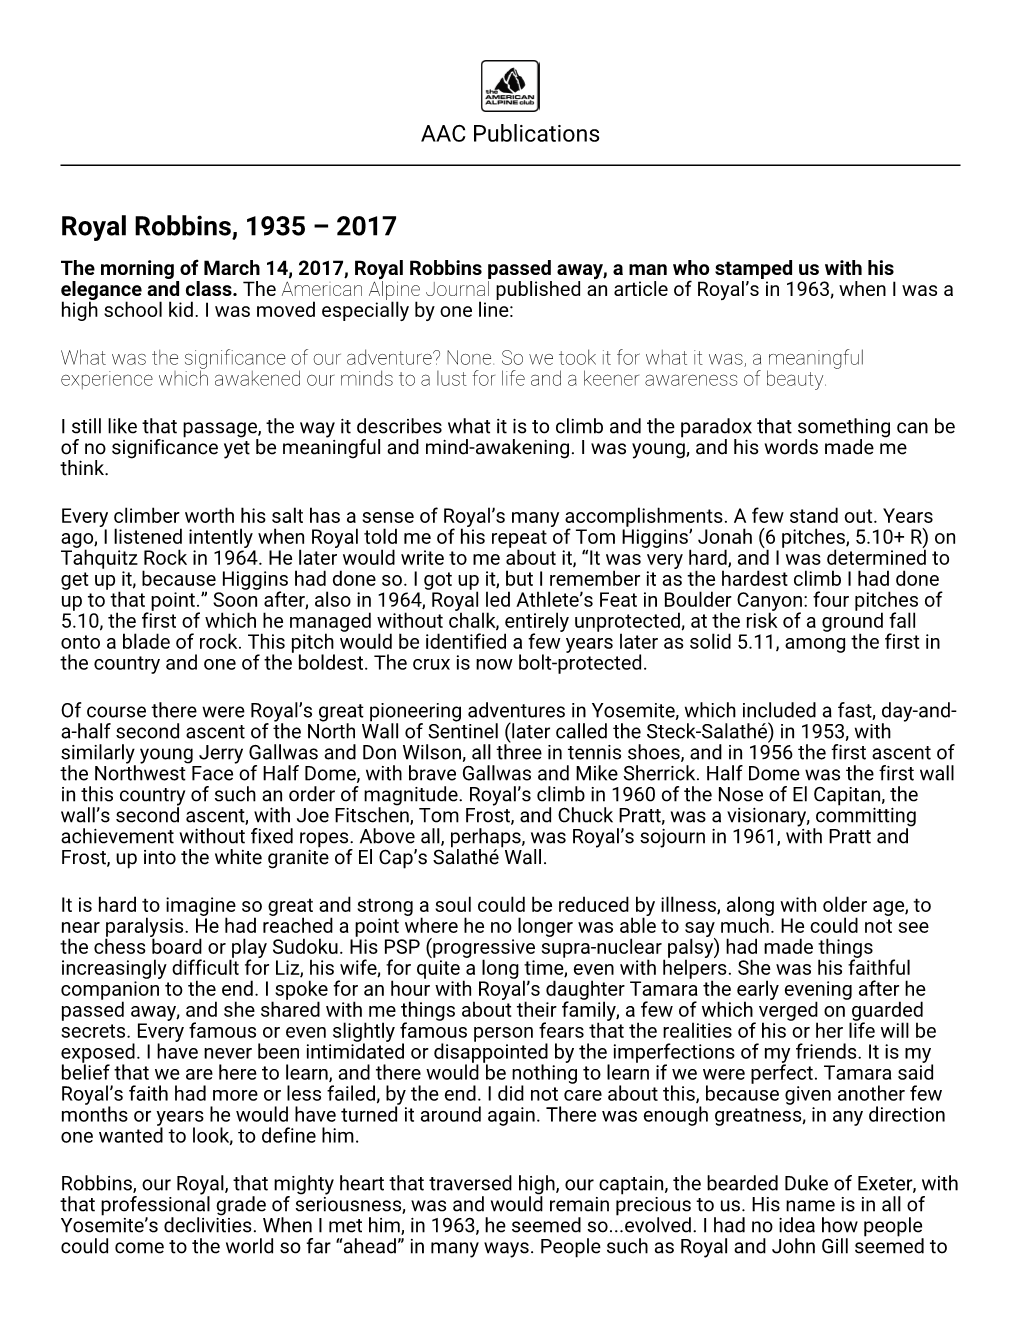 Royal Robbins, 1935 – 2017 the Morning of March 14, 2017, Royal Robbins Passed Away, a Man Who Stamped Us with His Elegance and Class